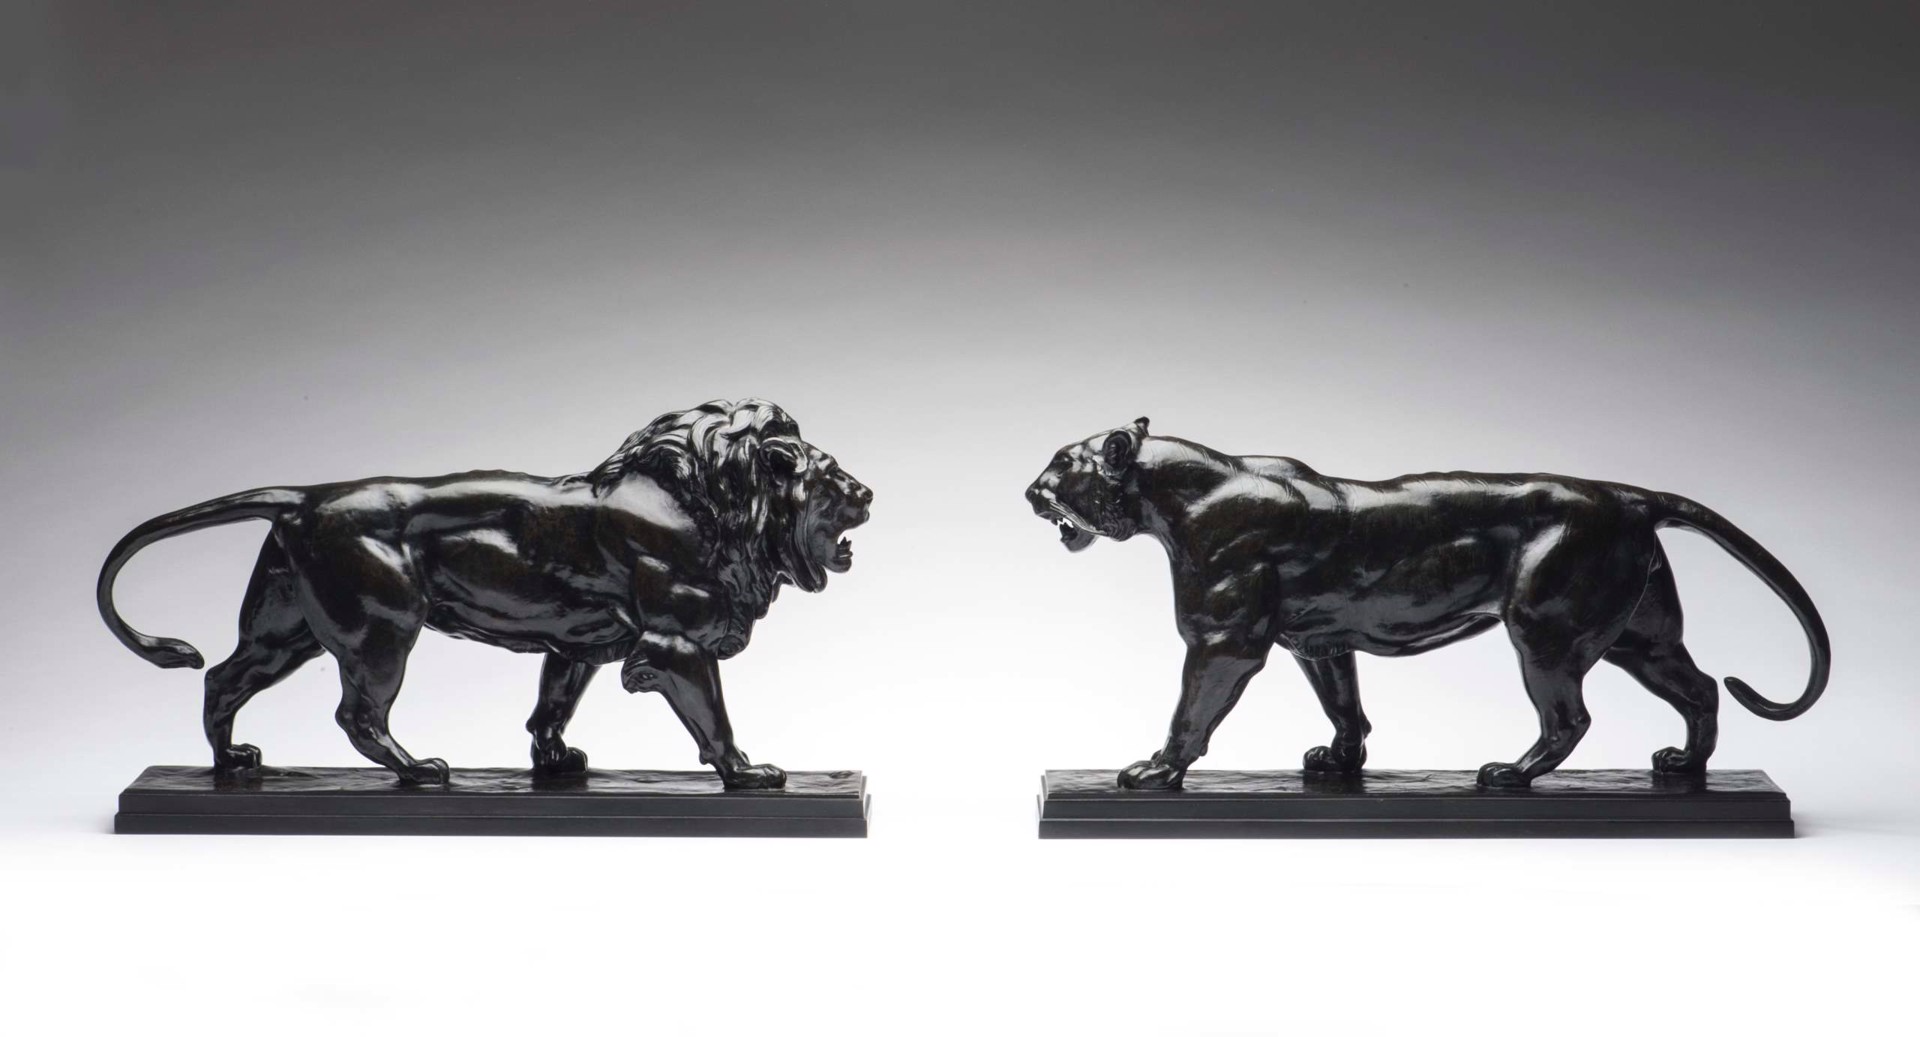 Walking Lion and Walking Tiger, a pair by Antoine-Louis Barye